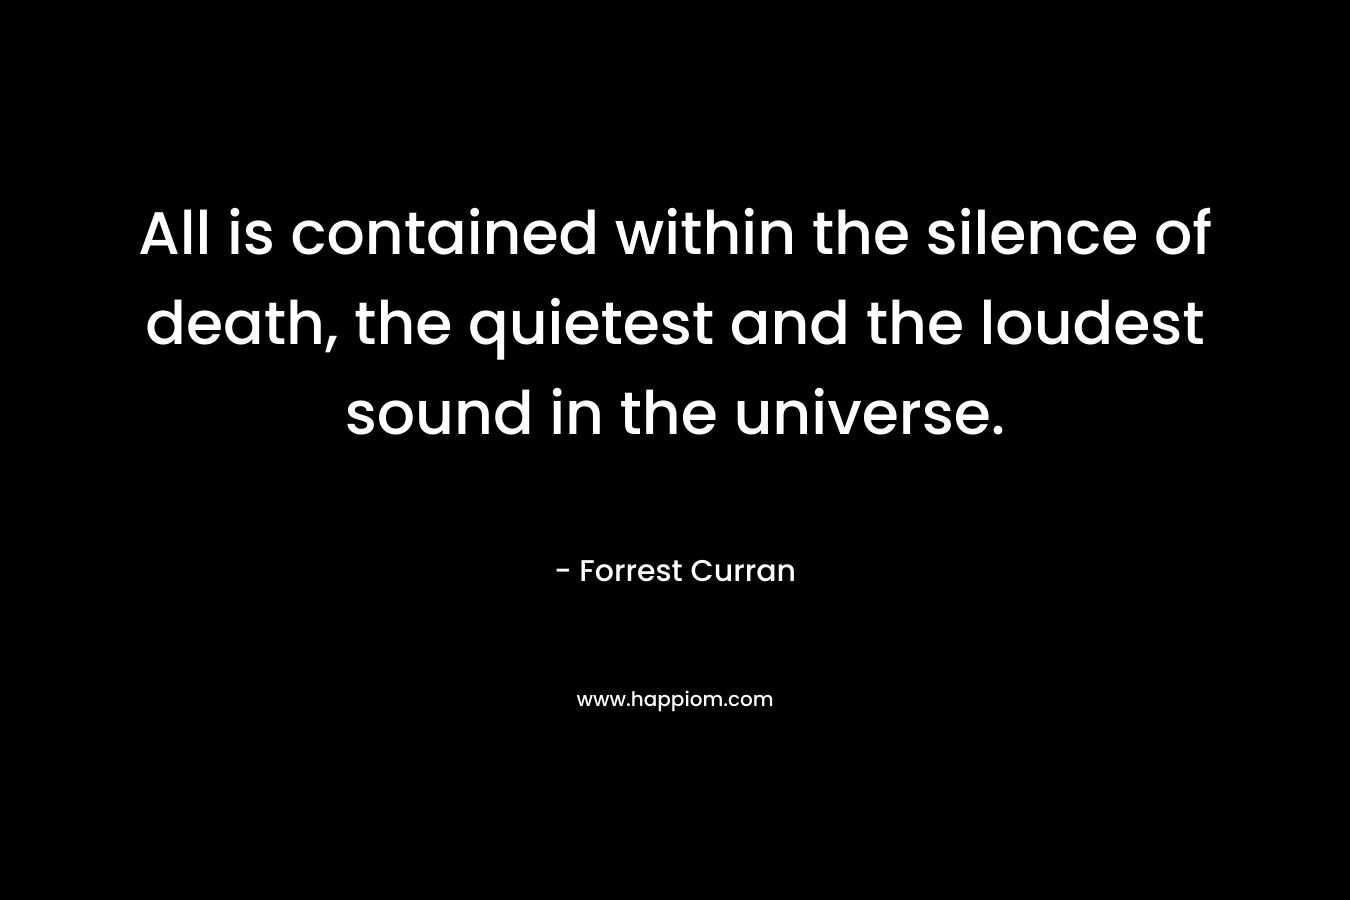 All is contained within the silence of death, the quietest and the loudest sound in the universe. – Forrest Curran